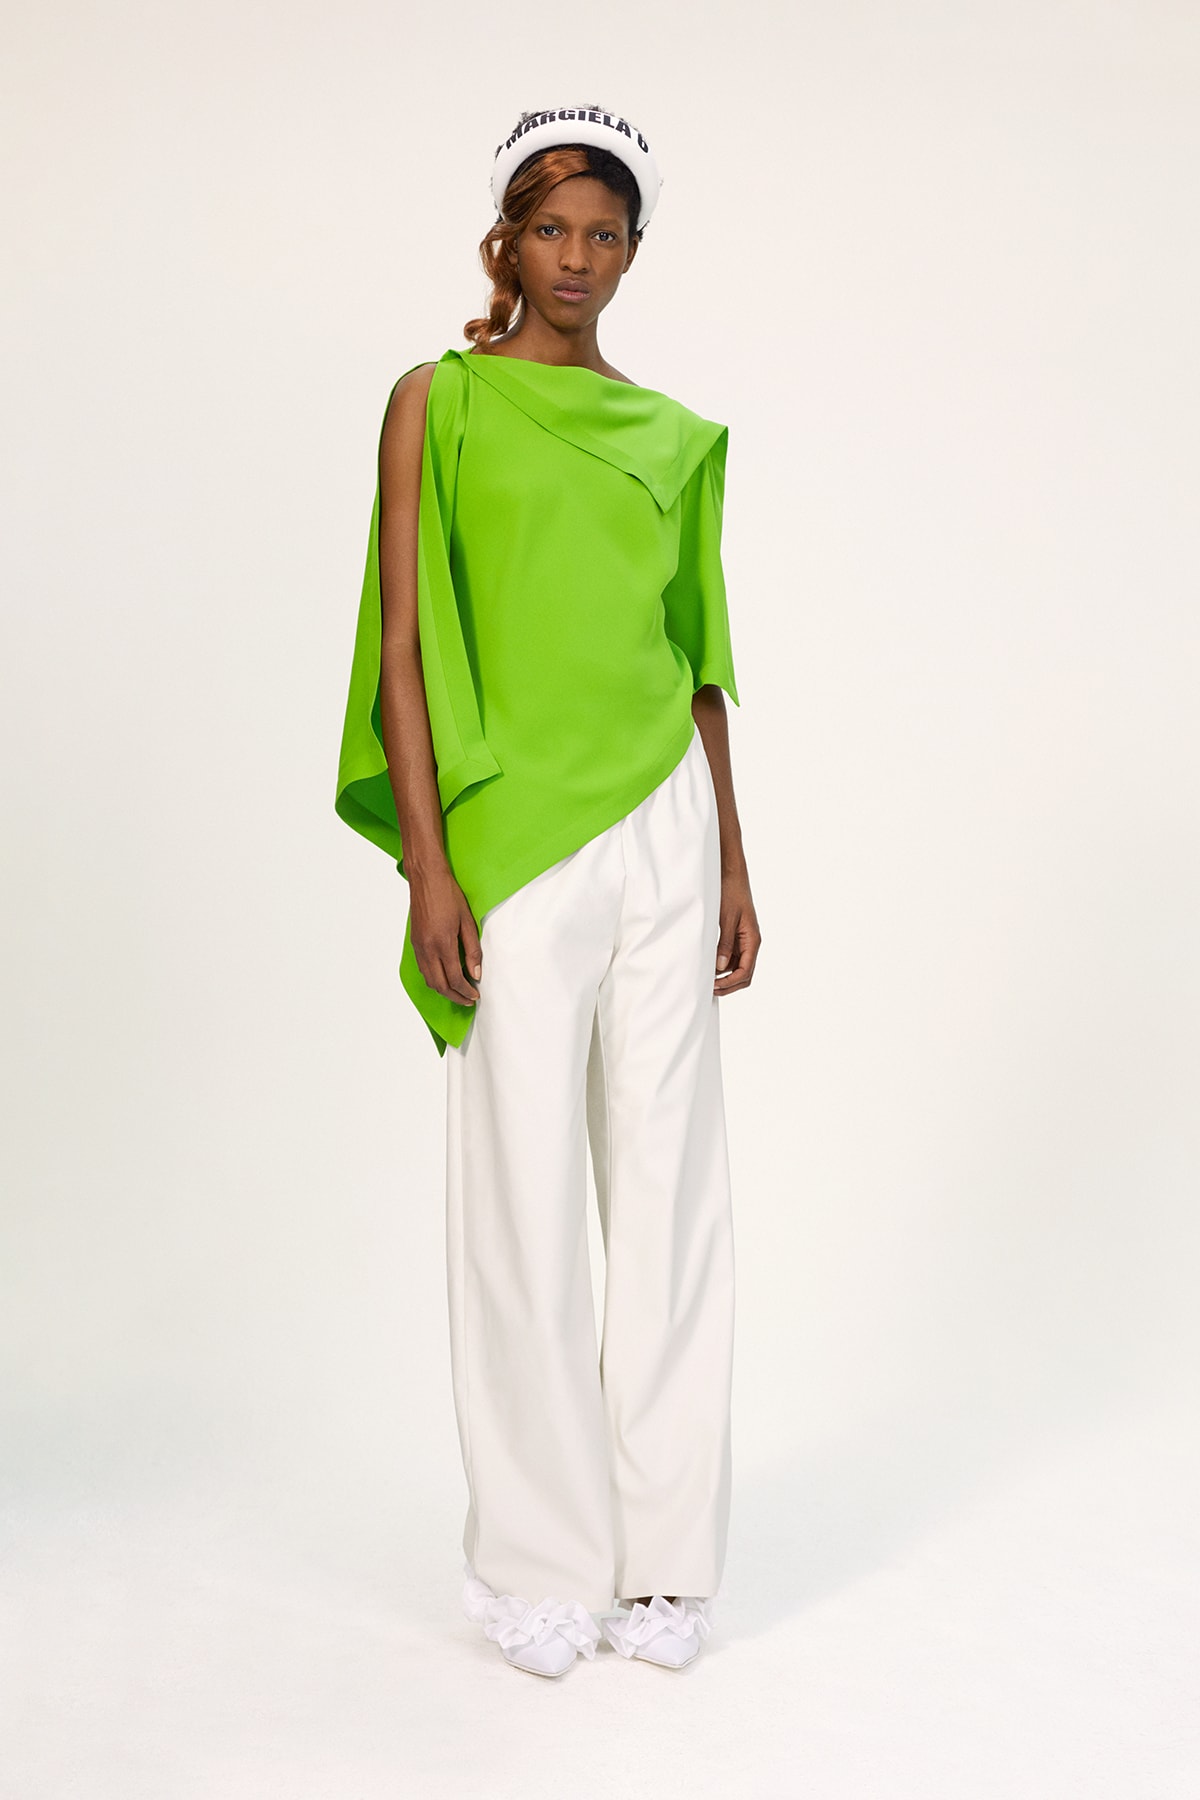 MM6 Maison Margiela Spring/Summer 2020 Collection Lookbook Draped Top Green White Trousers